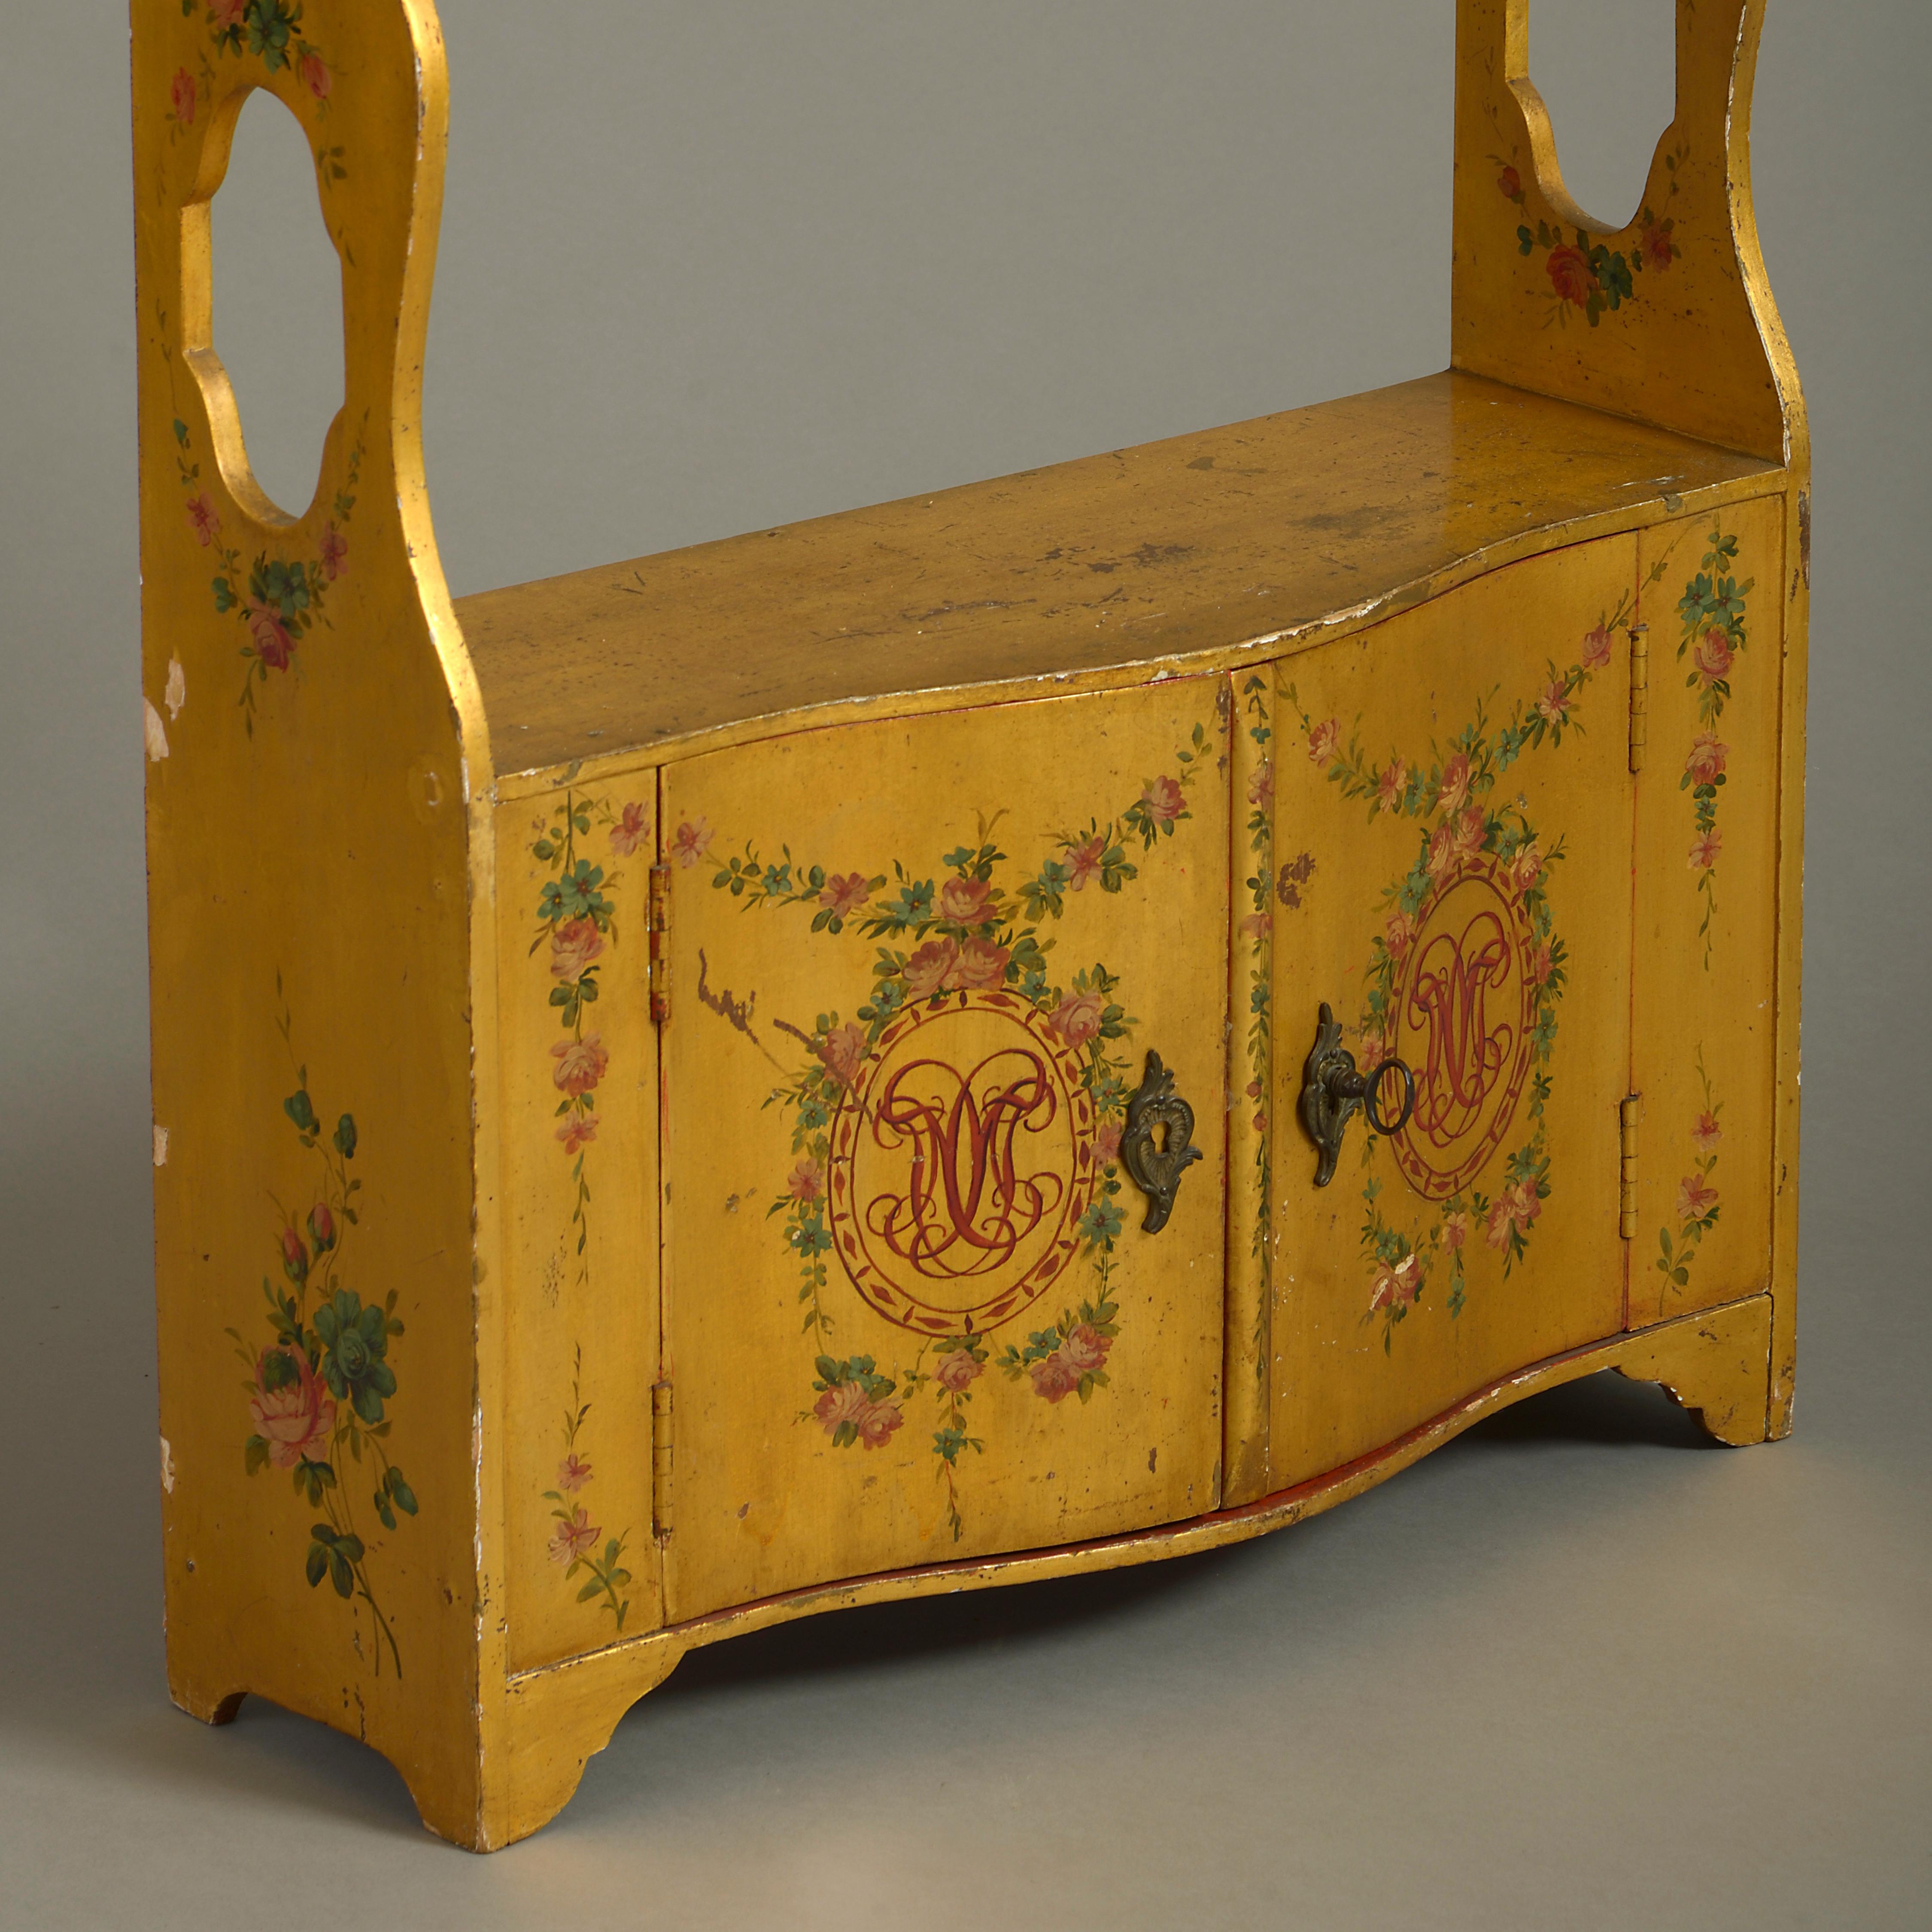 English Pair of 18th Century Yellow Painted Hanging Shelves